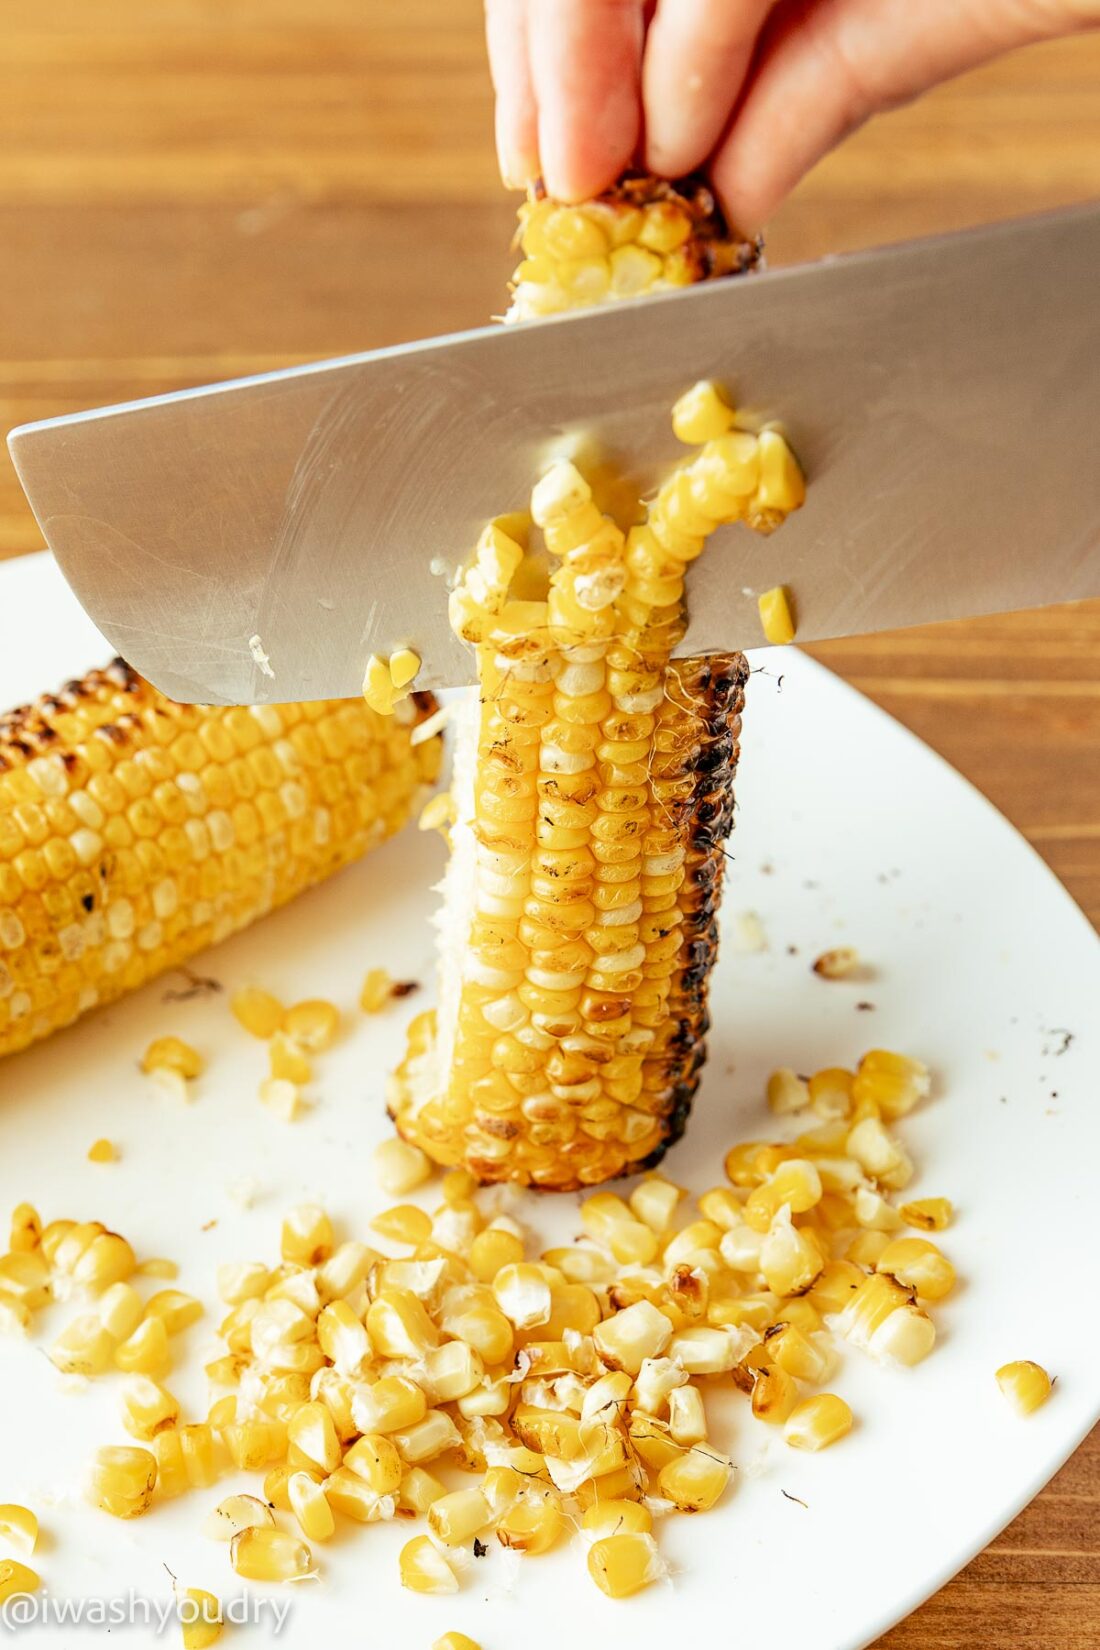 slicing grilled corn off cob with knife.